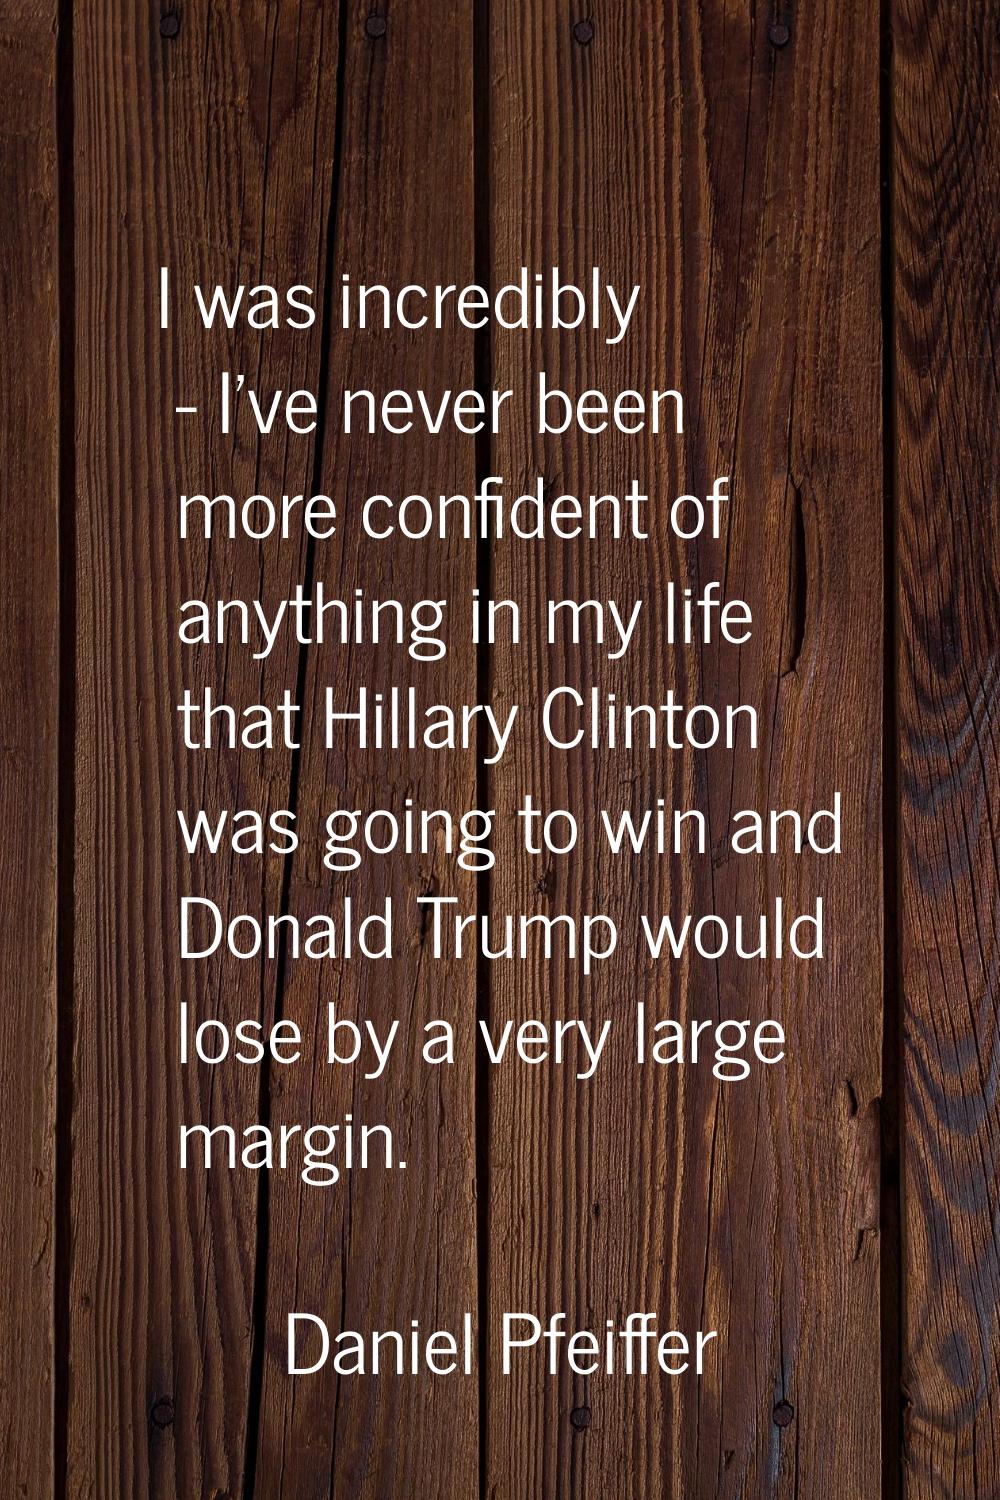 I was incredibly - I've never been more confident of anything in my life that Hillary Clinton was g